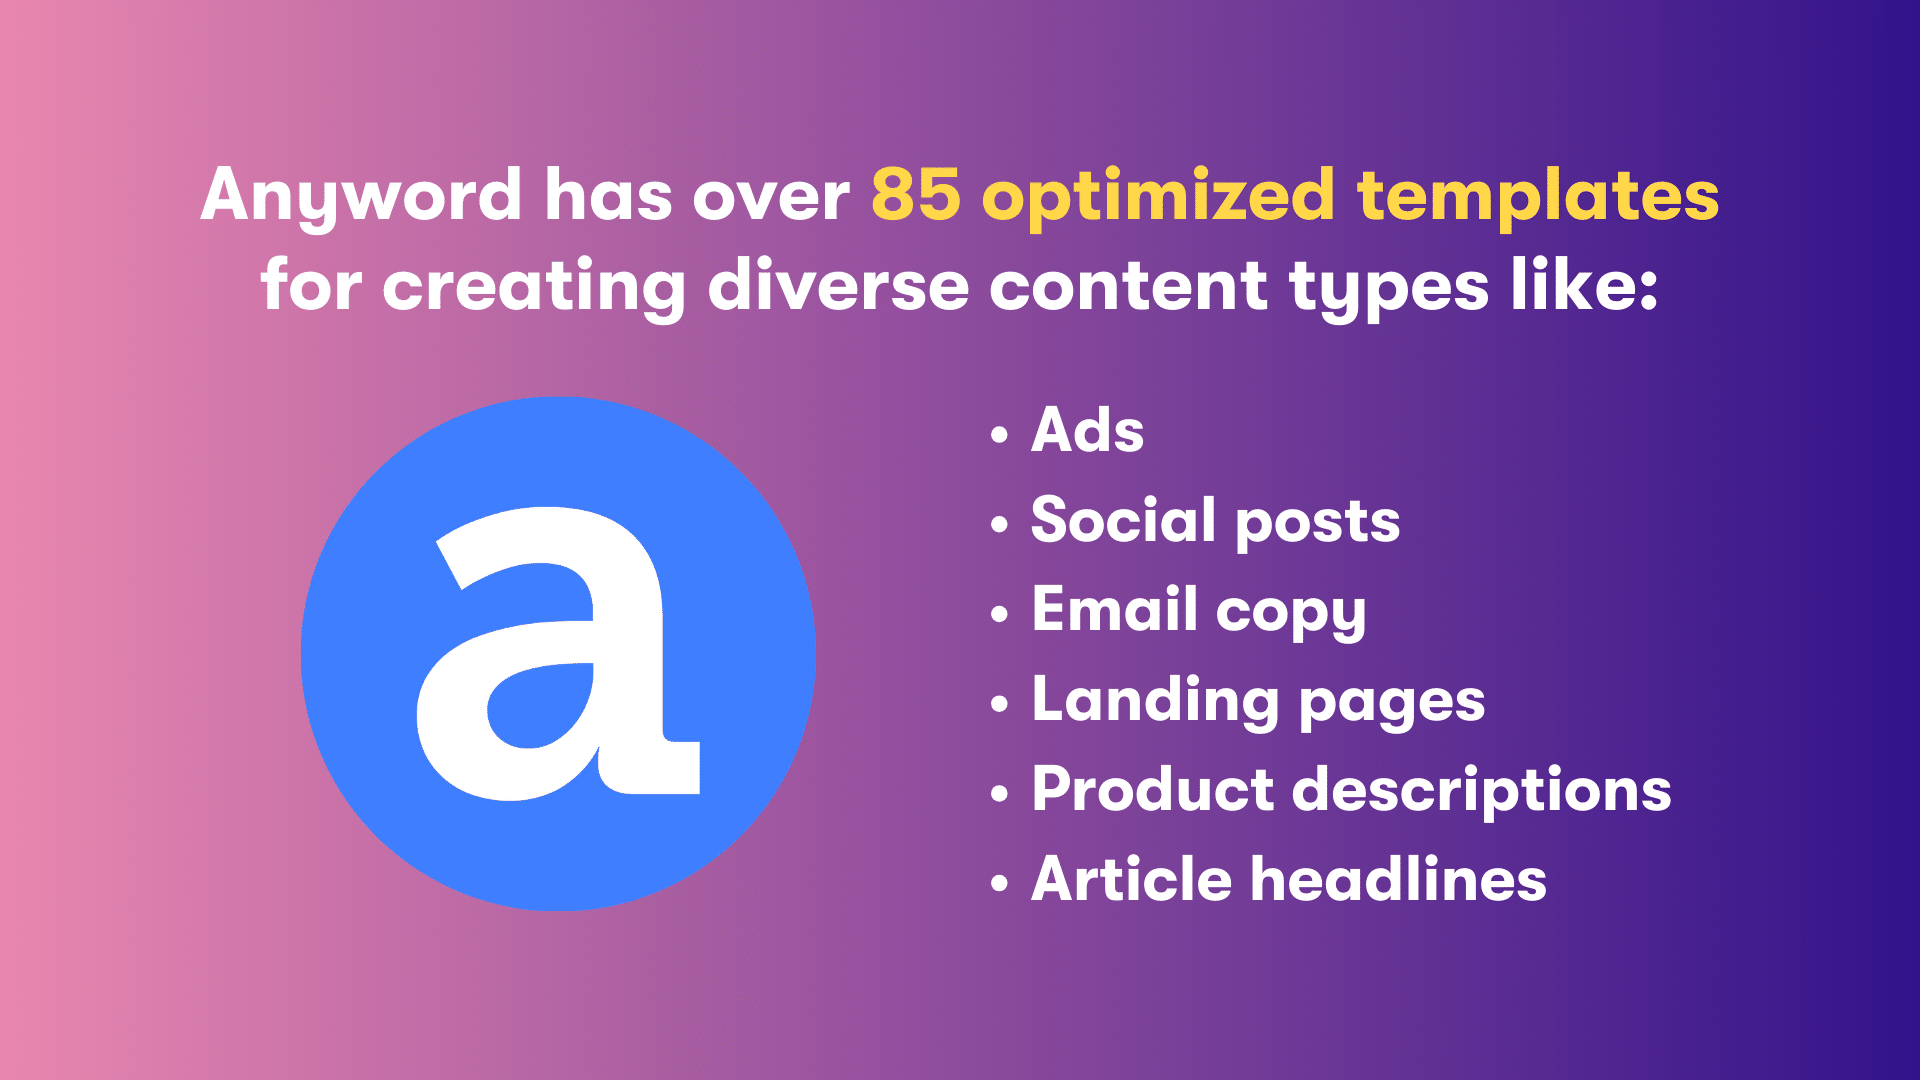 Anyword, over 85 optimized templates, ads, social posts,  email copy,  landing pages,  product descriptions,  article headlines